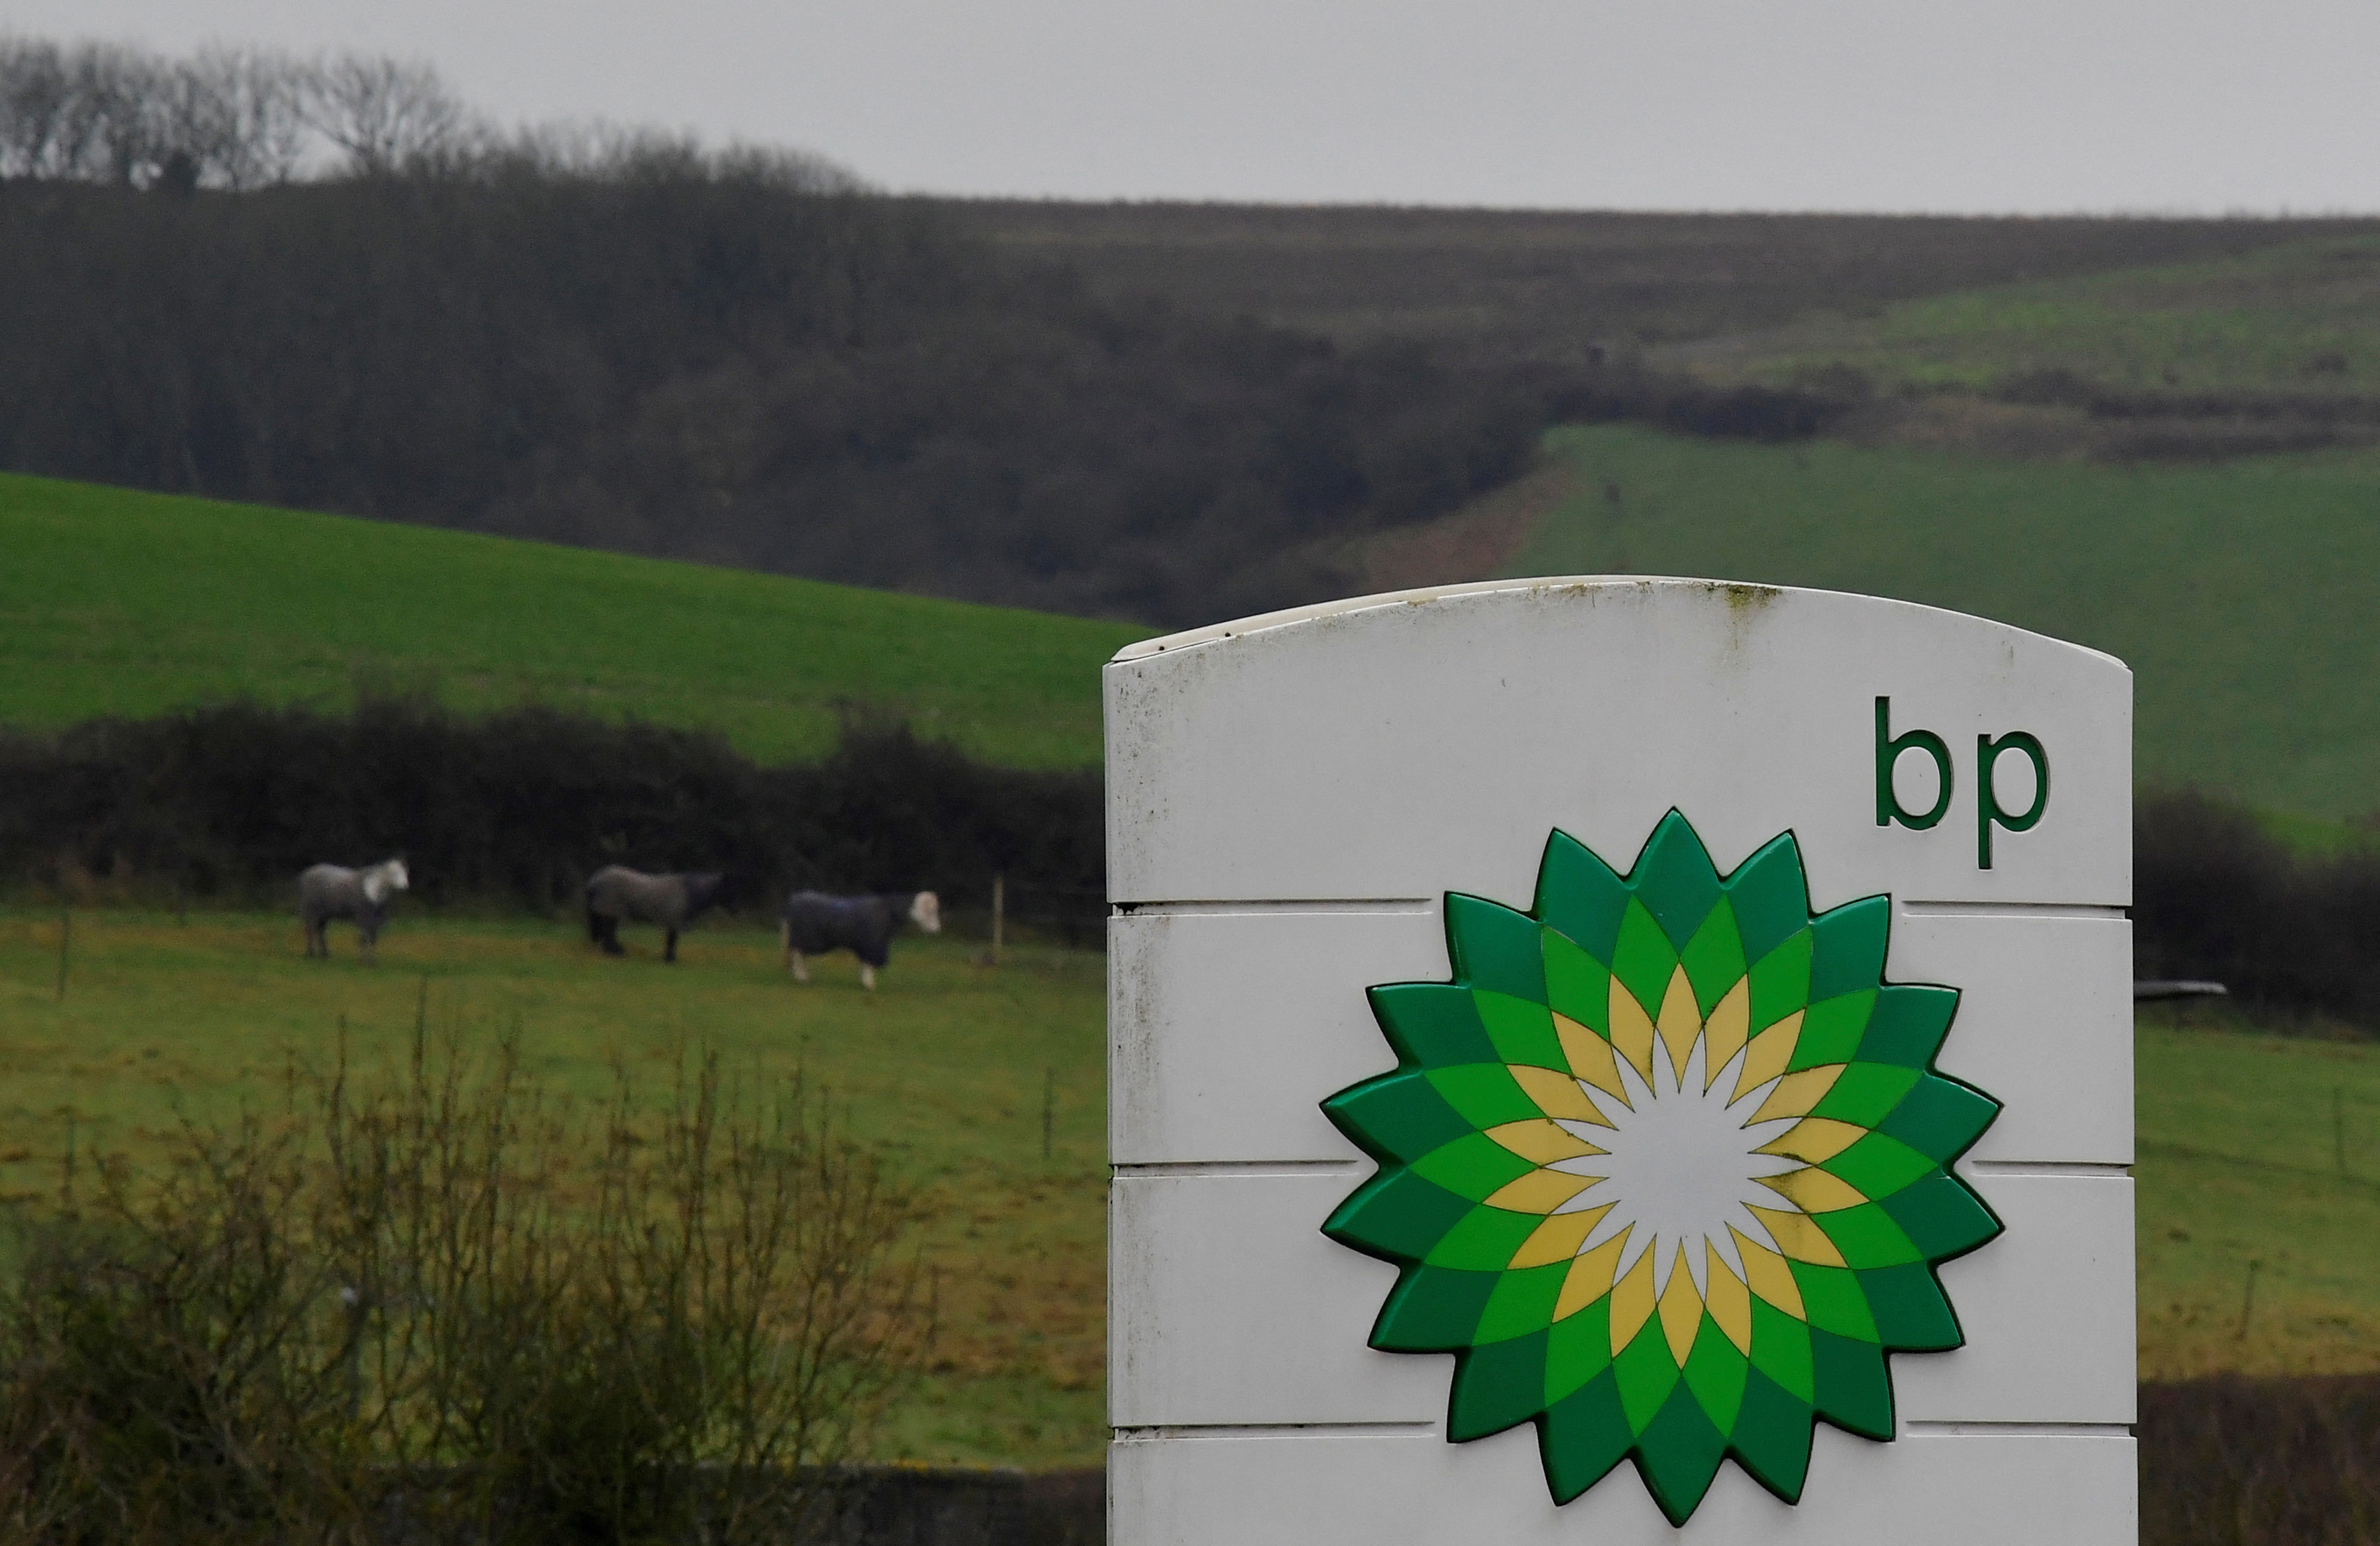 Signage is seen for BP (British Petroleum) at a service station near Brighton